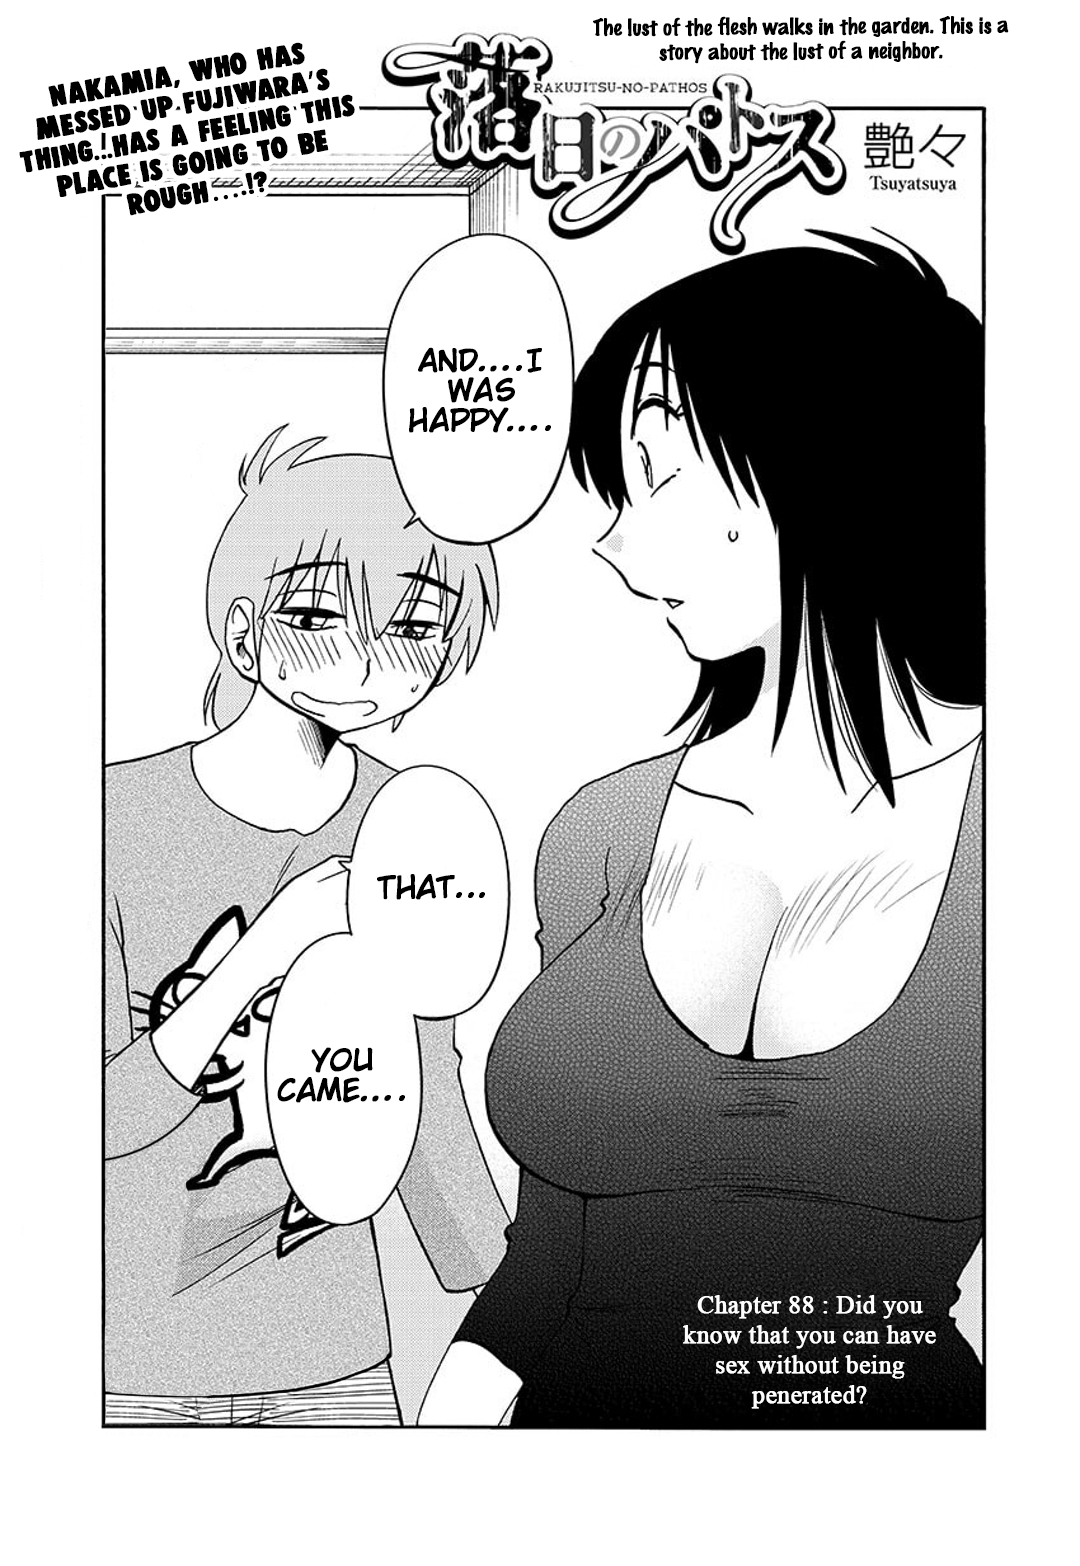 Rakujitsu No Pathos Chapter 88: Did You Know That You Can Have Sex Without Being Penetrated? - Picture 2